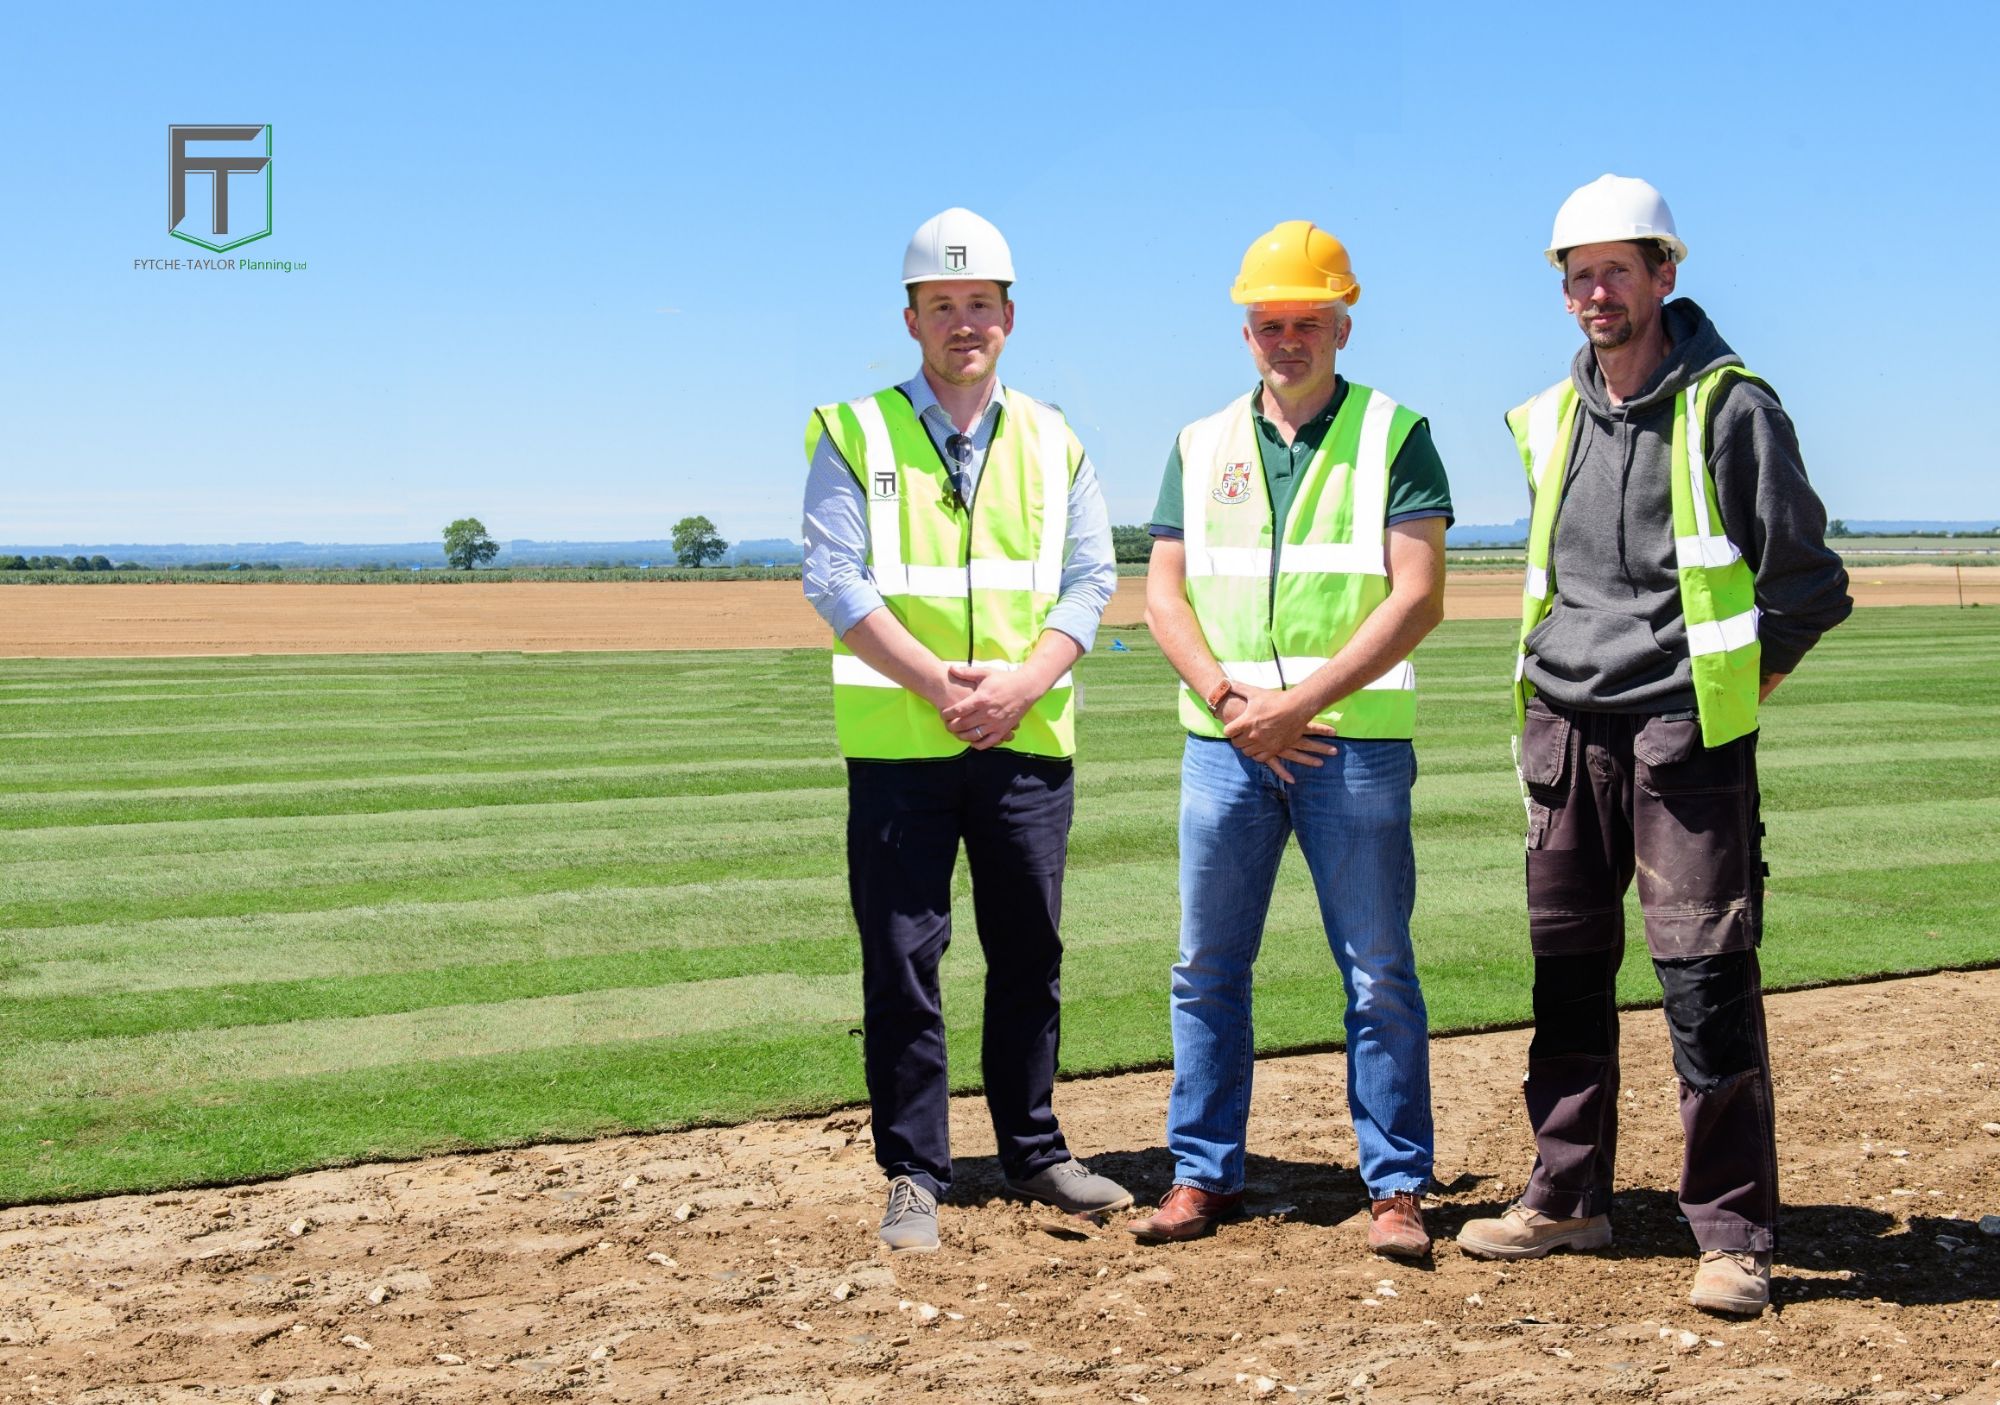 Managing Director Oliver Fytche-Taylor with representatives from Lincoln City Football Club during construction of the new Elite Performance & Training Centre